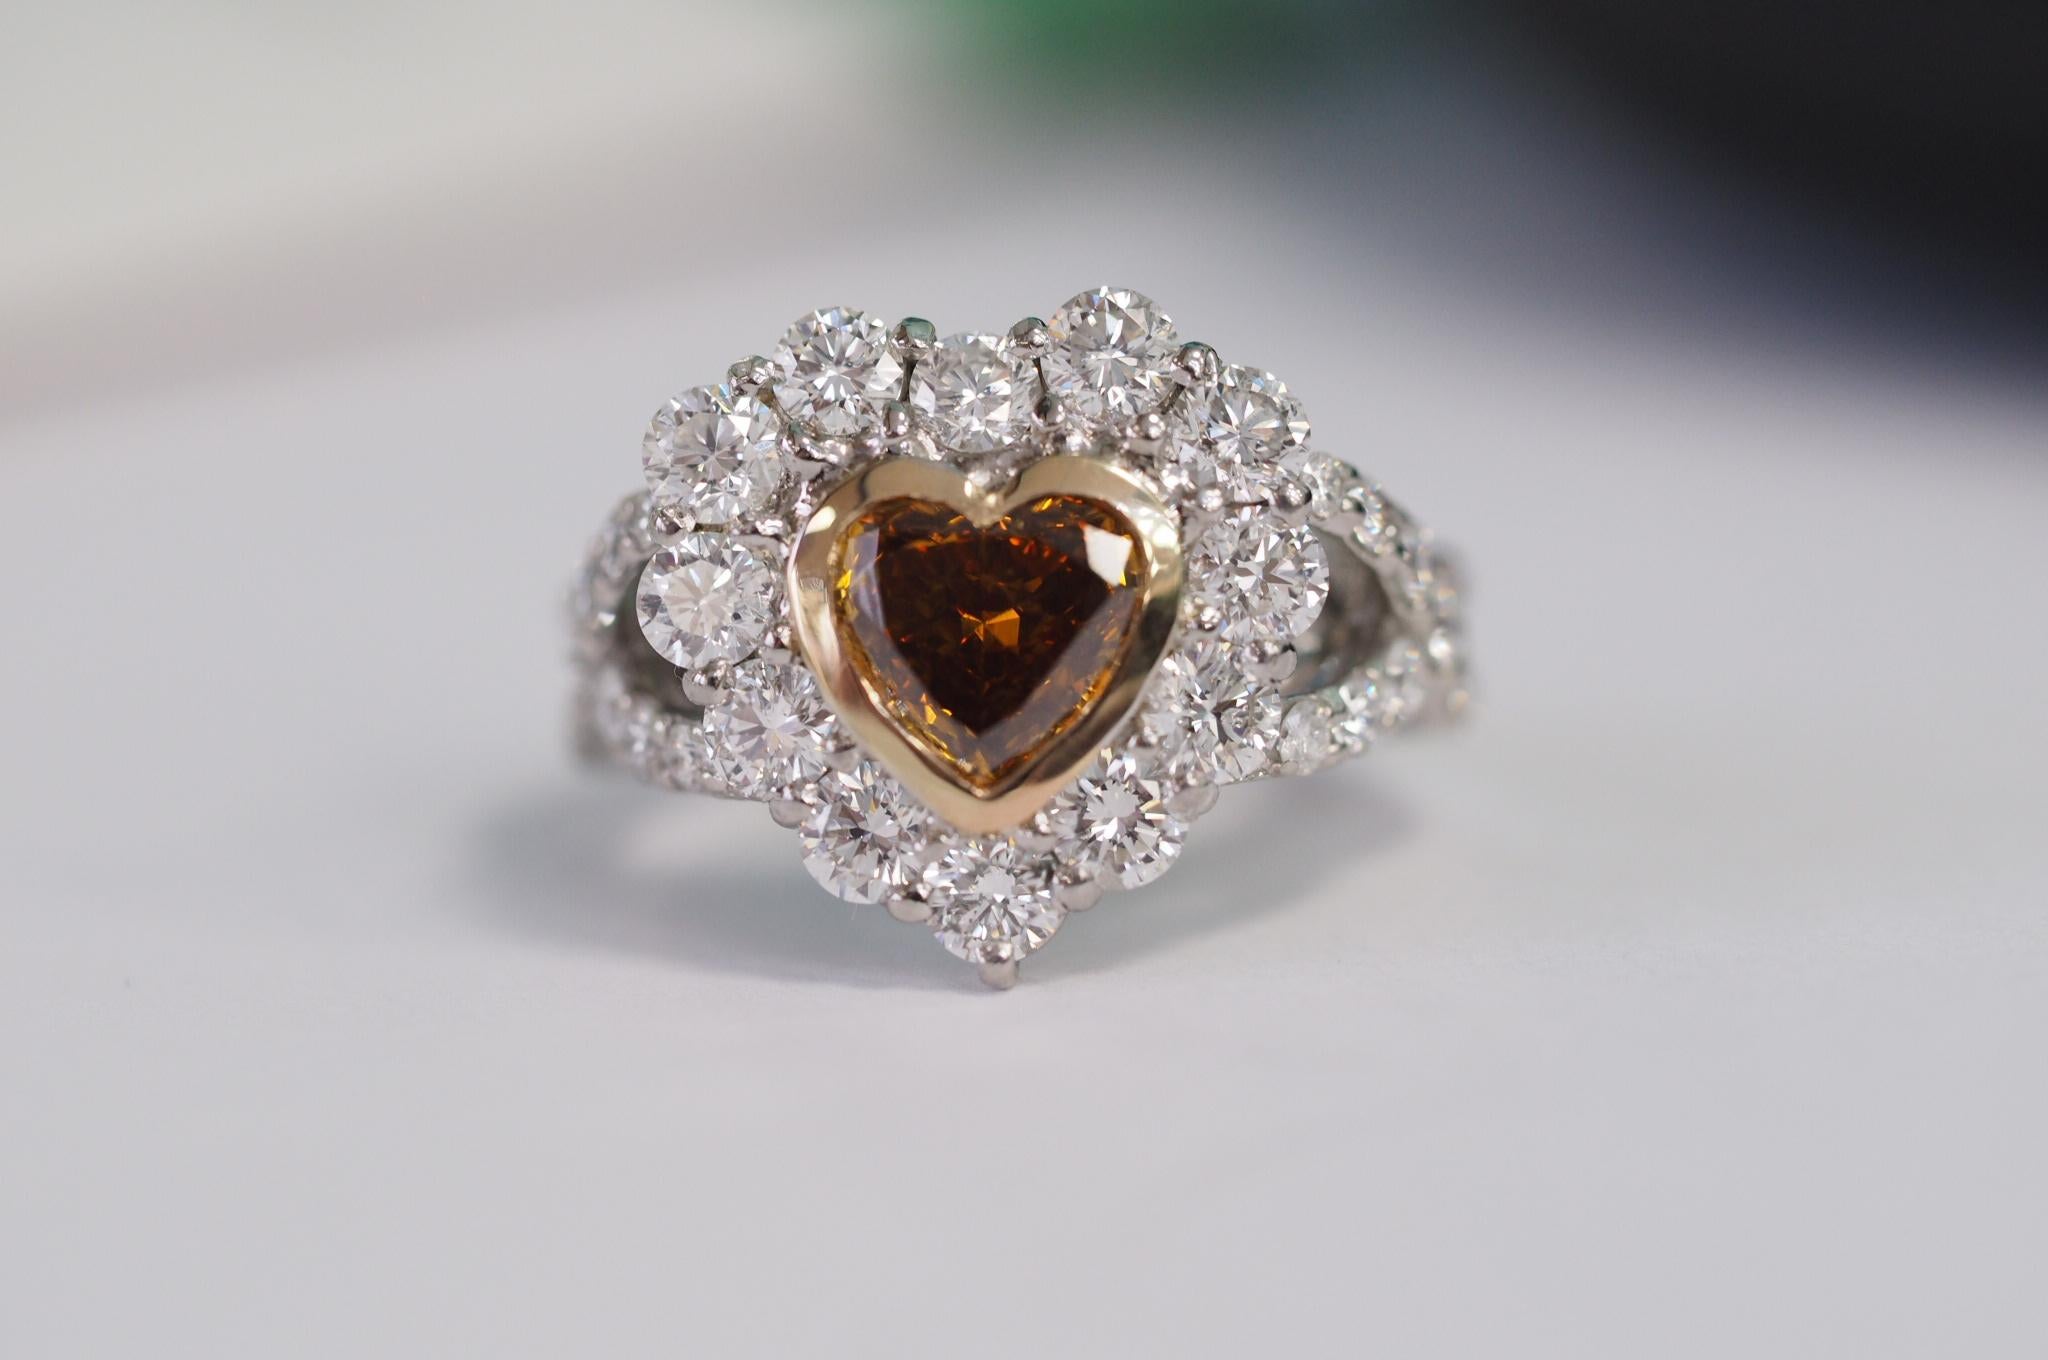 This Center is a Natural, fancy deep brownish yellowish orange Heart diamond with GIA certificate, no.1308992514. It weighs 1.01 carats and is  SI2  in clarity. The dimensions are 6.54 x 7.05 x 3.04mm. It is bezel set with 18k yellow gold. This ring